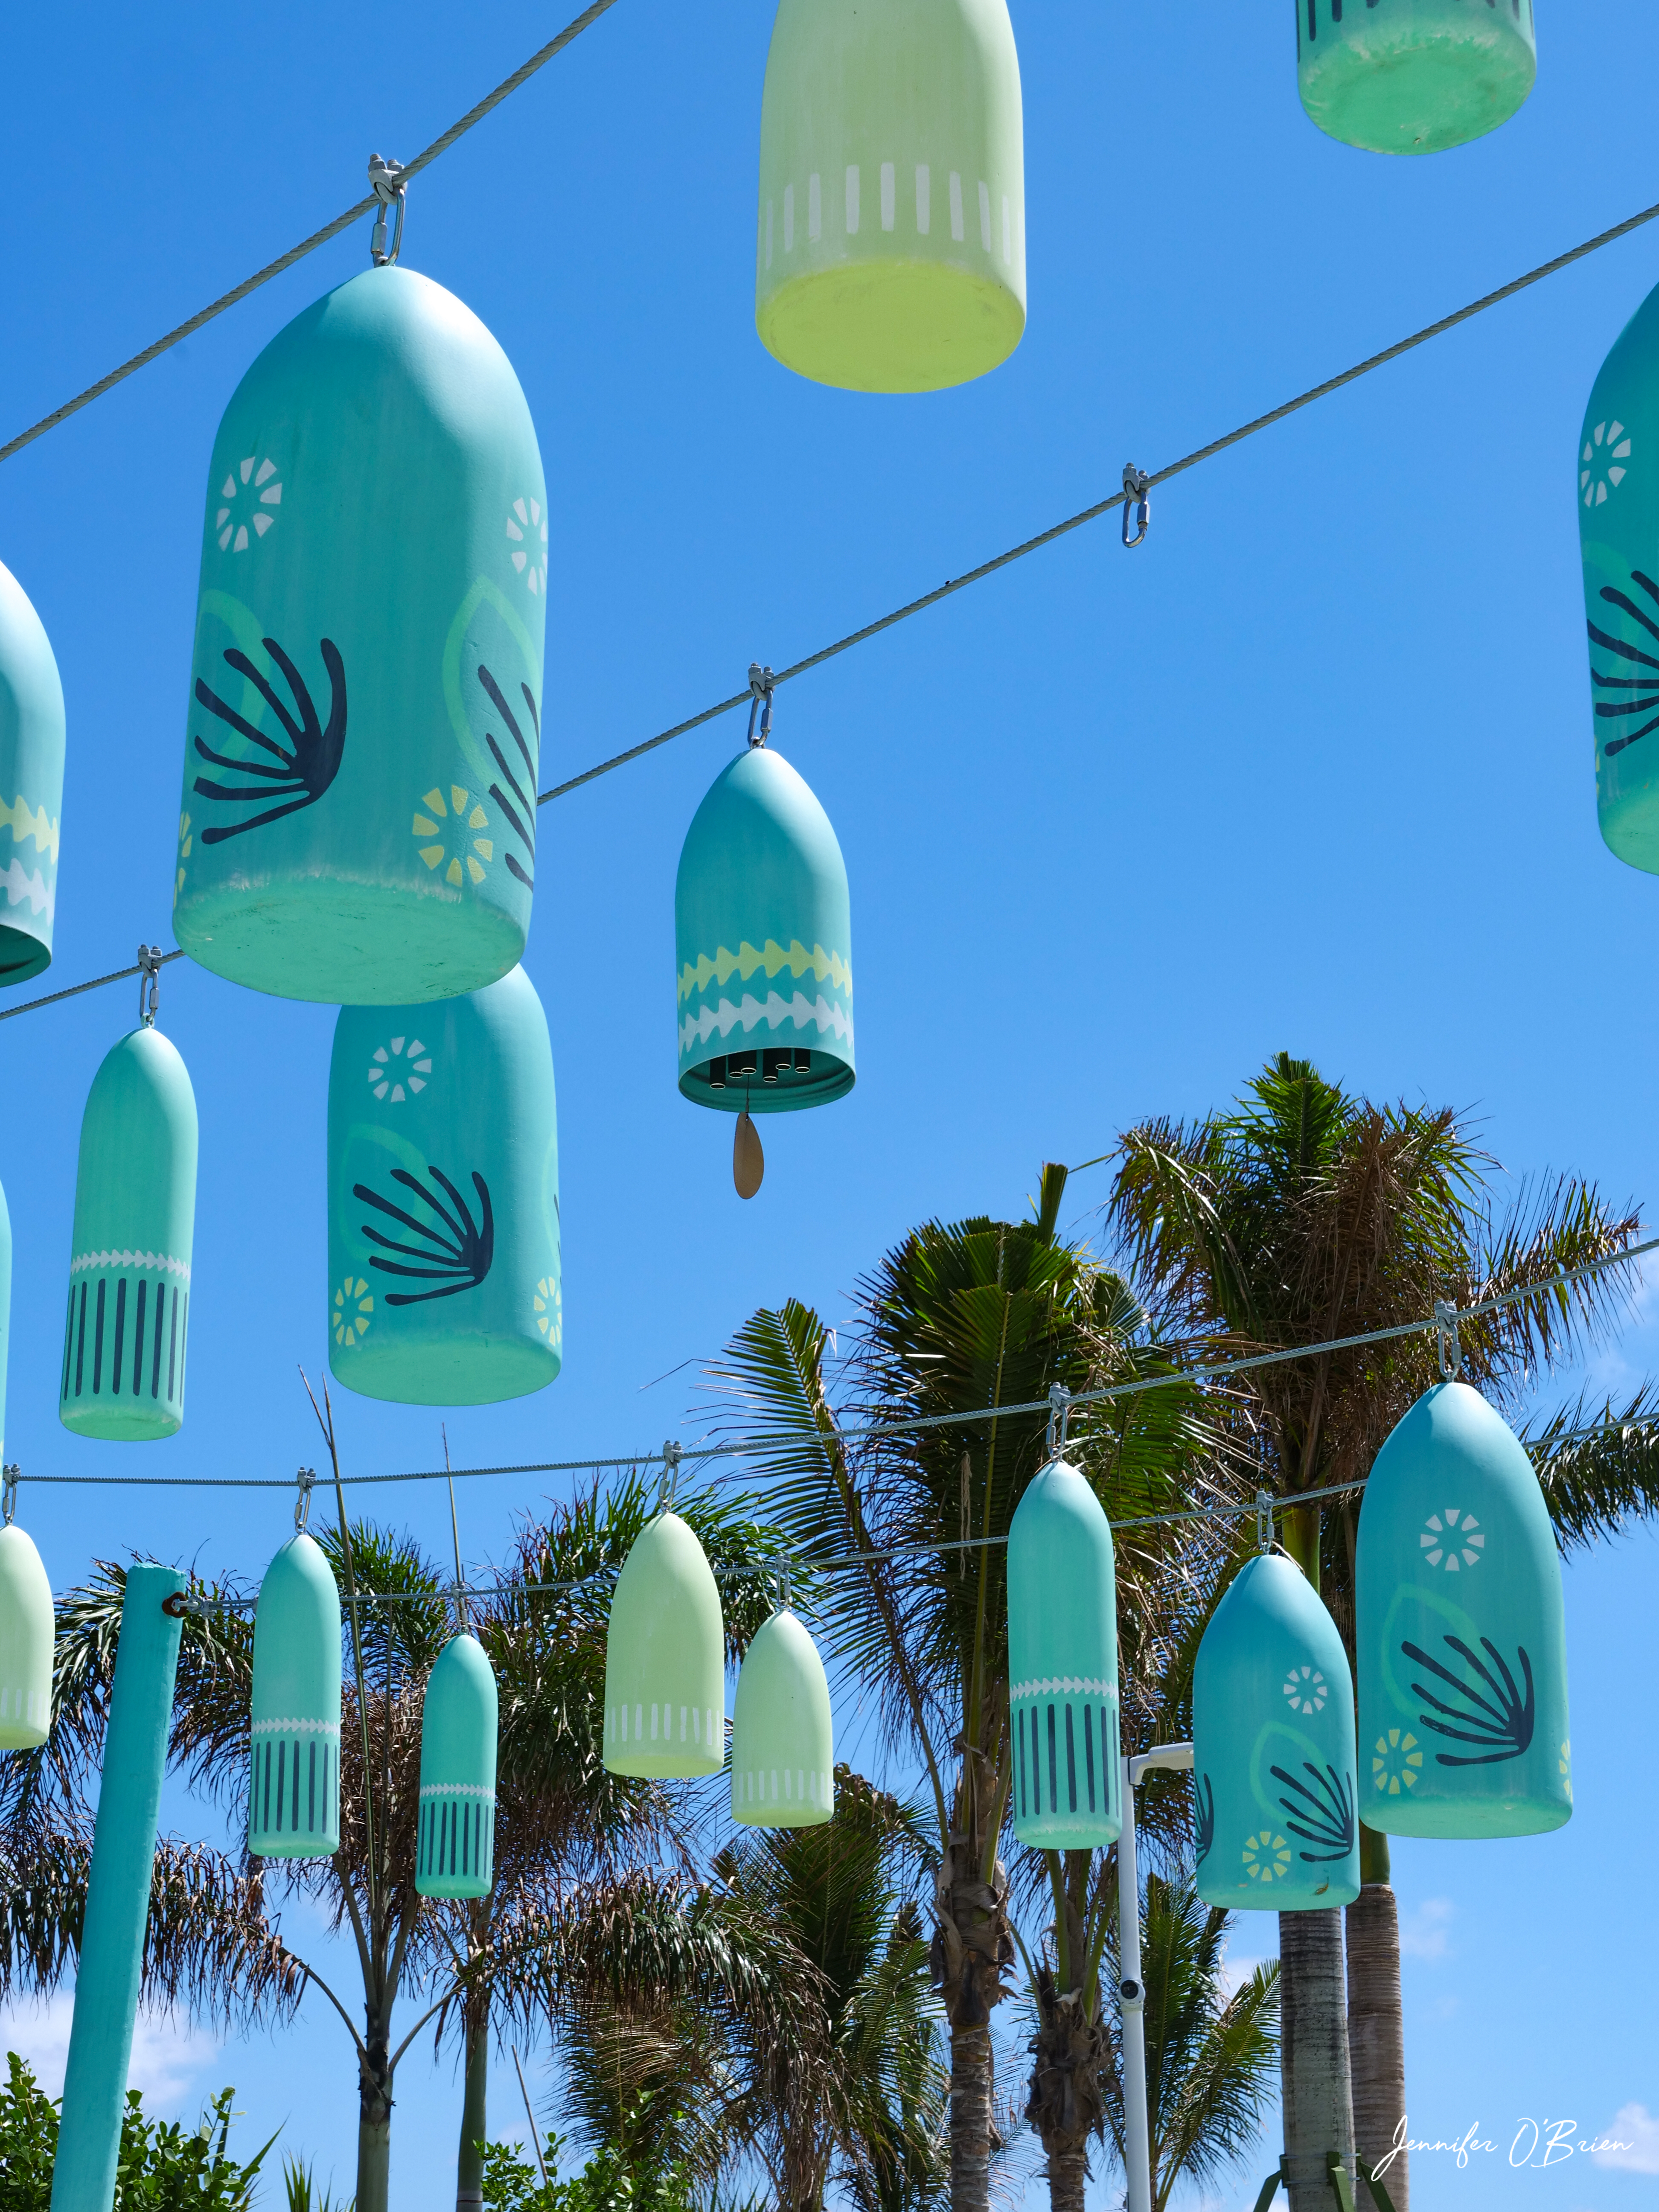 Chill island chimes Instagram Guide to CoCo Cay Royal Caribbean Cruise Island